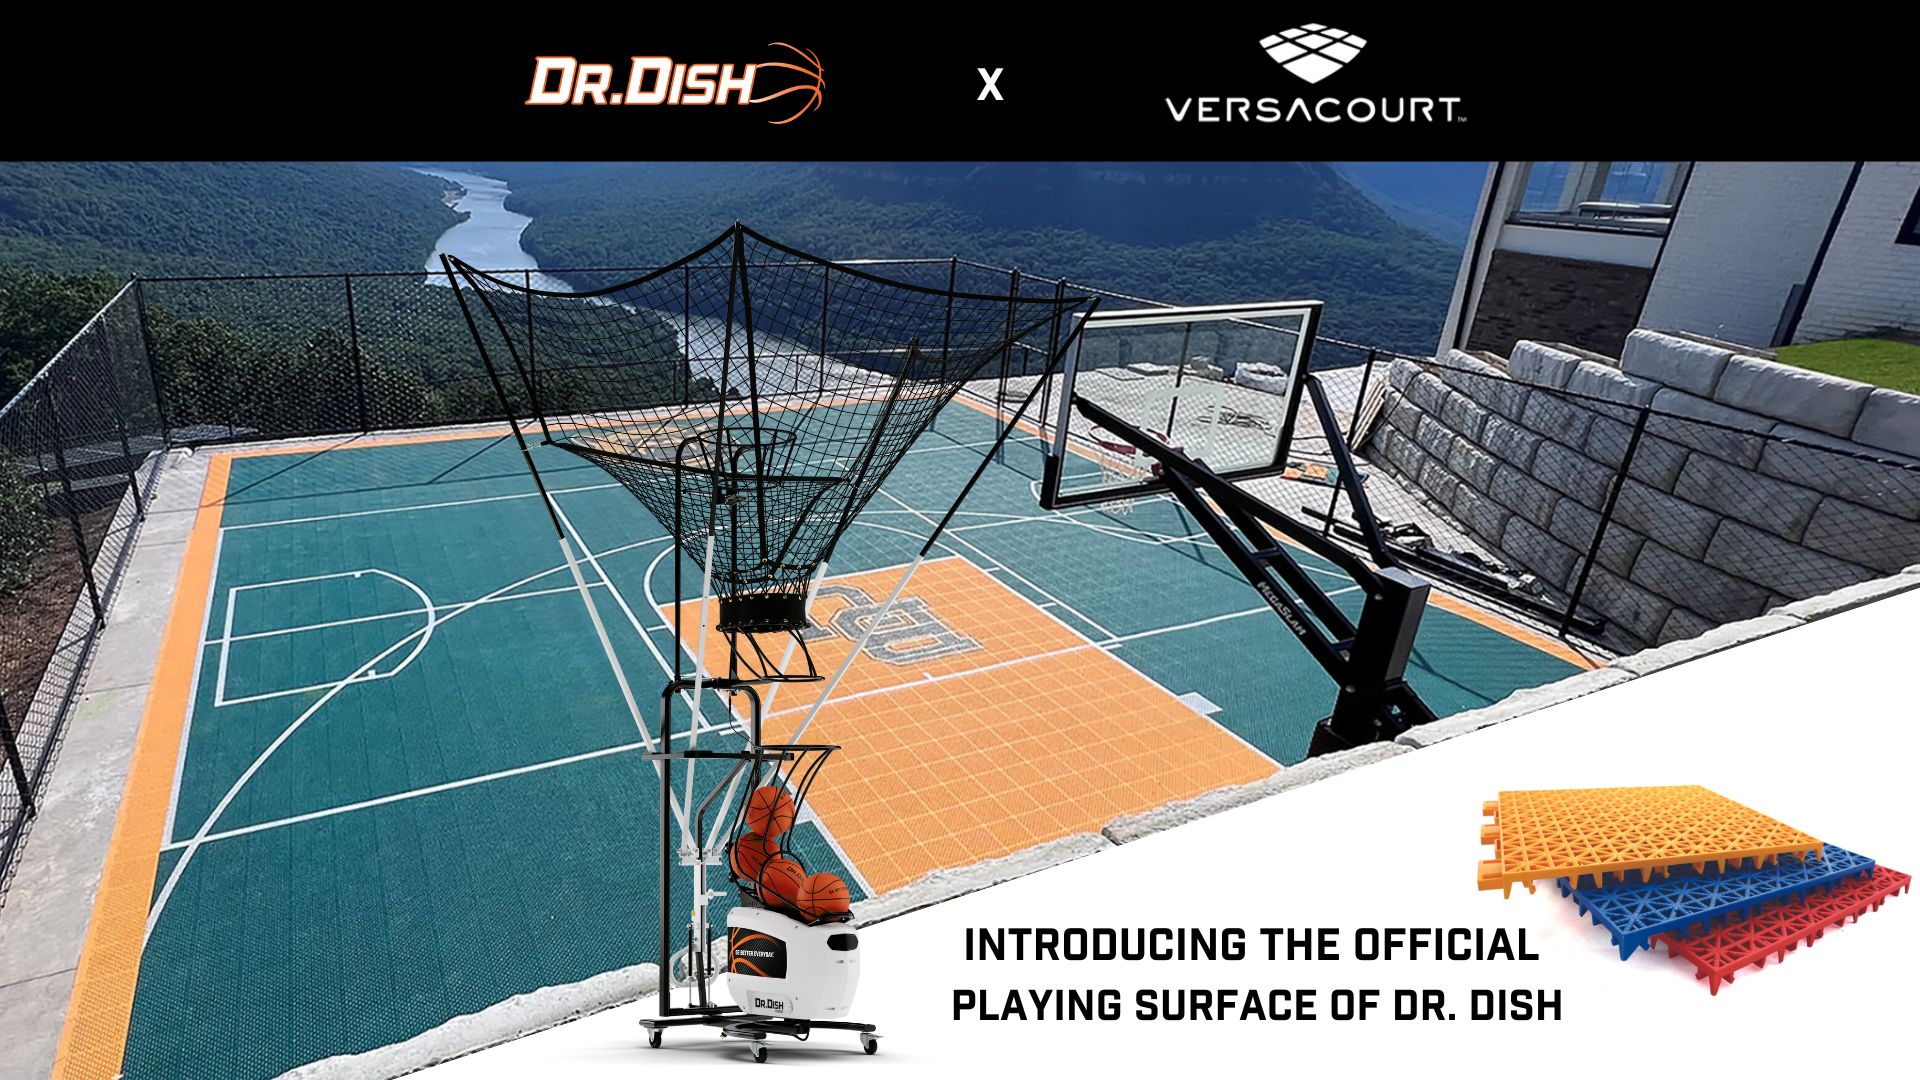 VersaCourt is the official playing surface of Dr. Dish